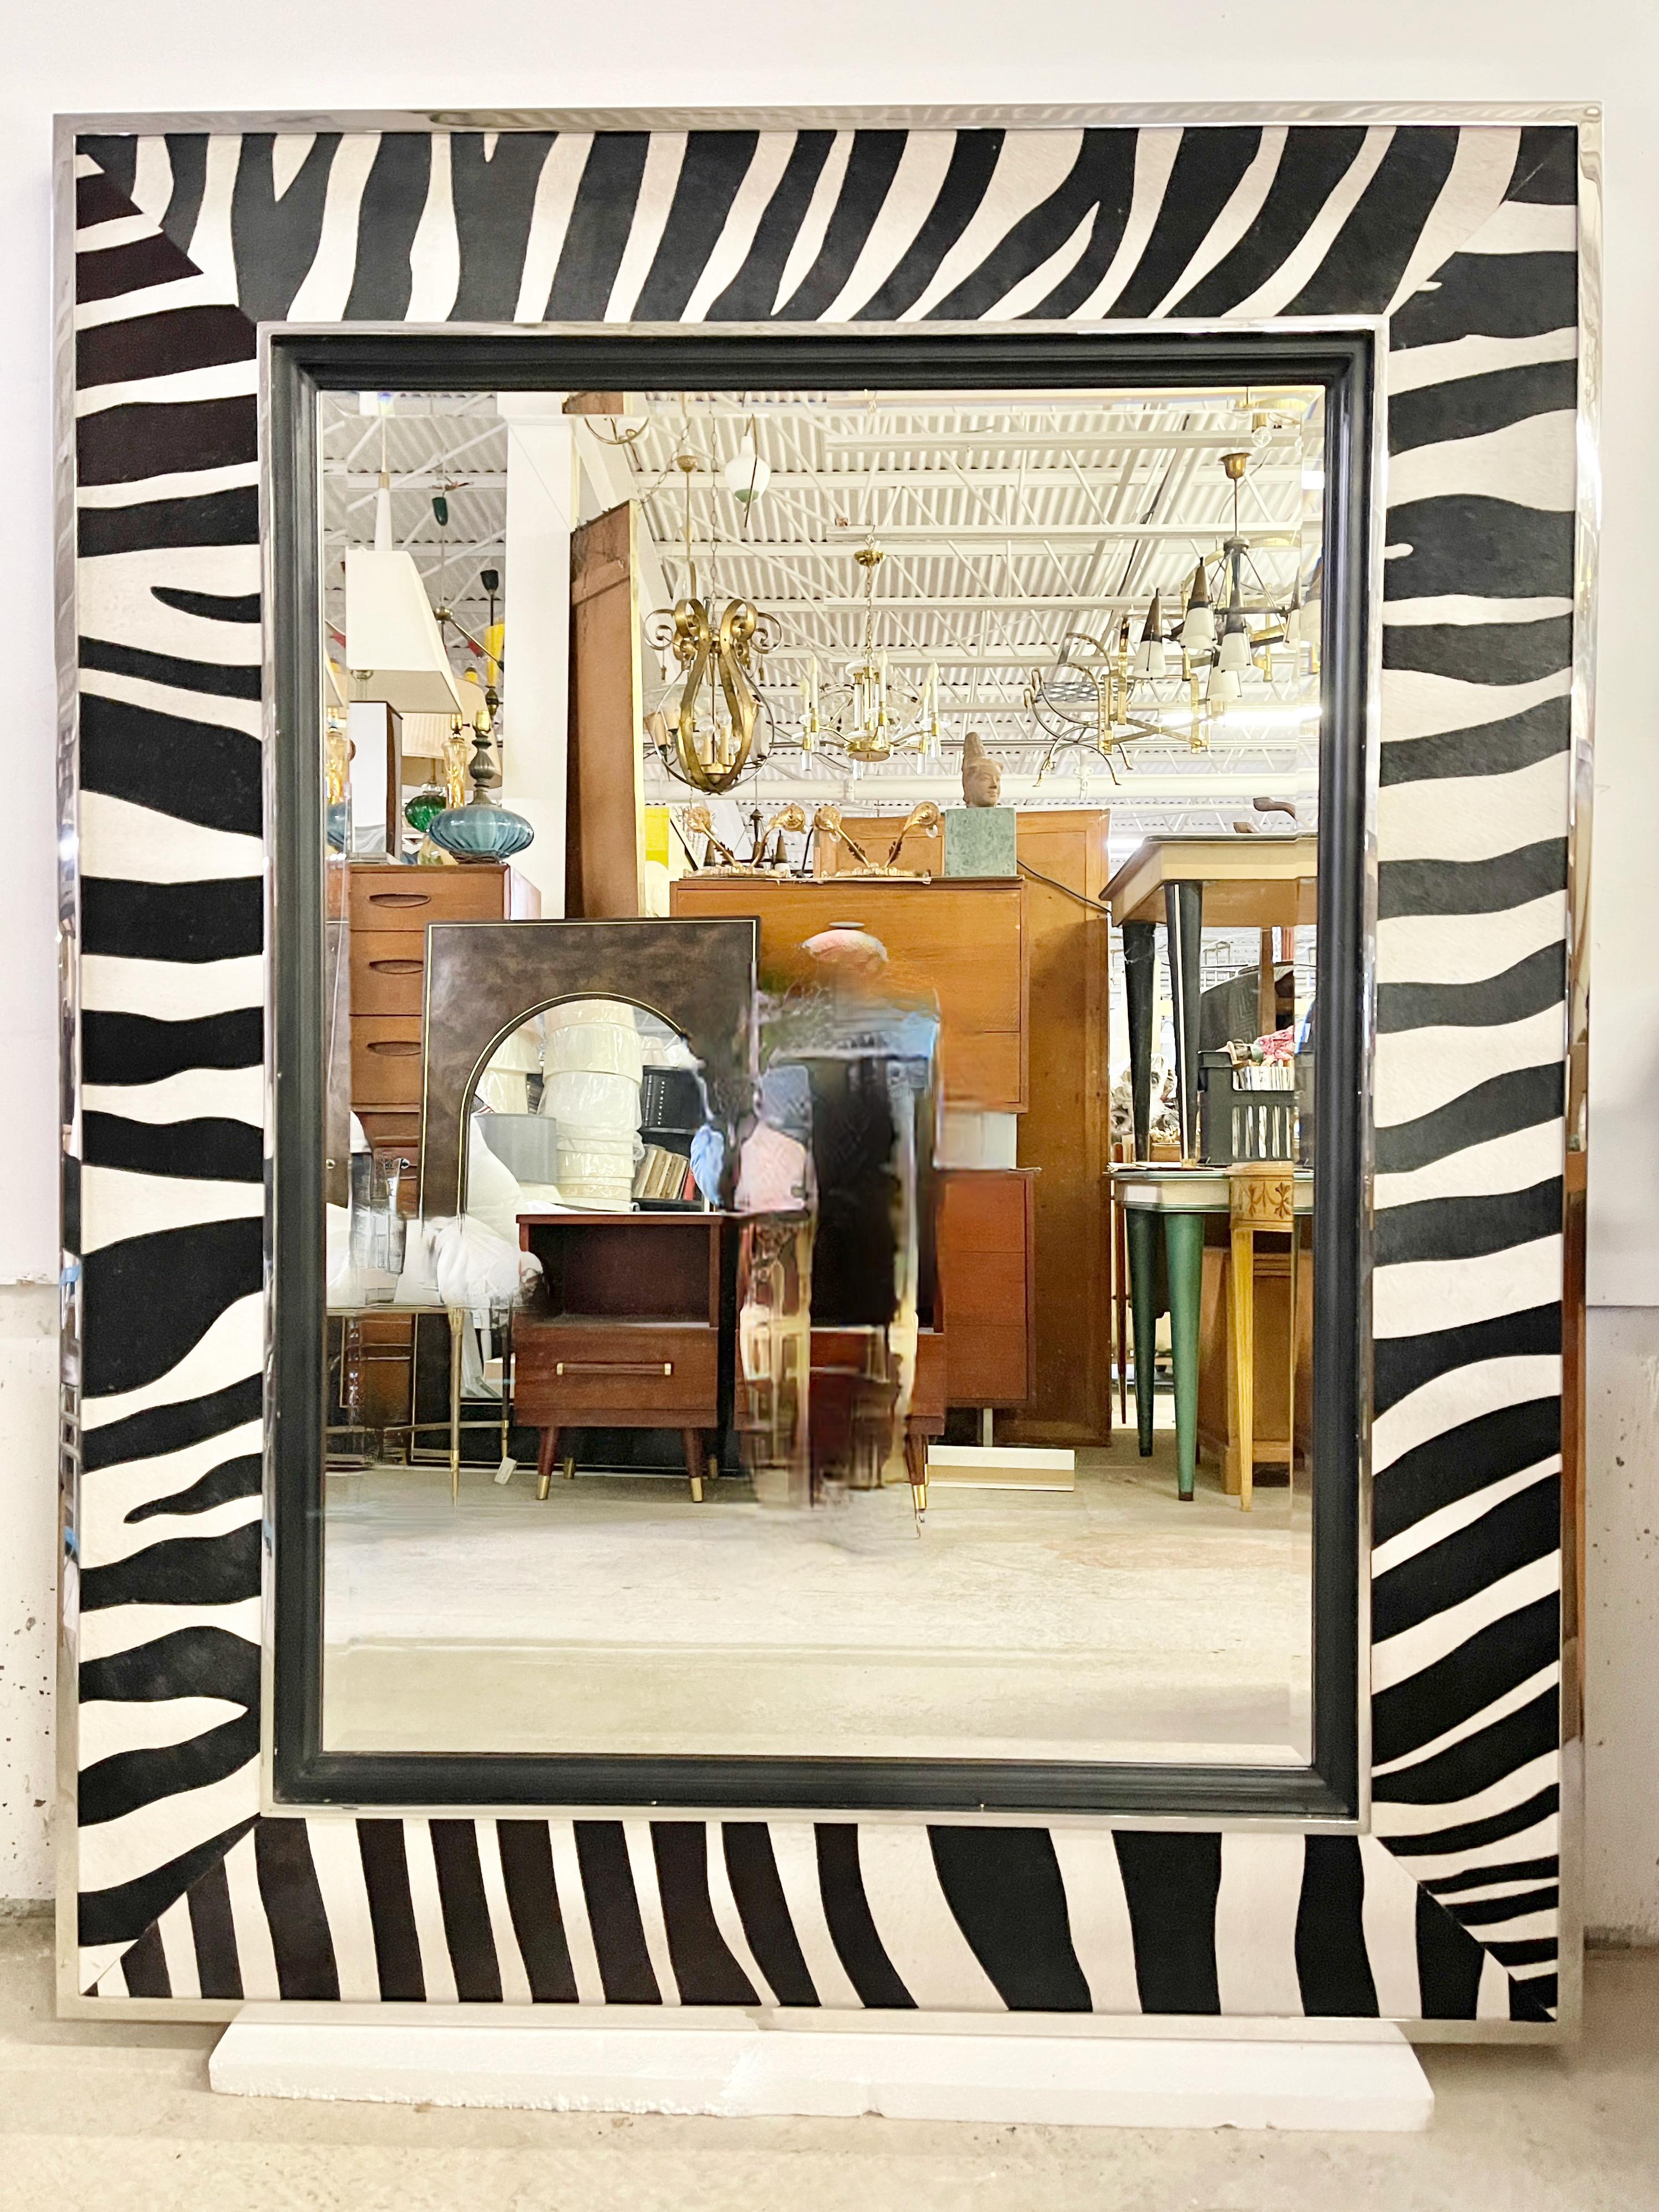 Extra large exotic modernist beveled glass wall mirror set within outer and inner frame of brightly polished nickel plated steel, featuring faux zebra dyed cowhide and ebonized mahogany inner frame
Ralph Lauren embossed metal tag on